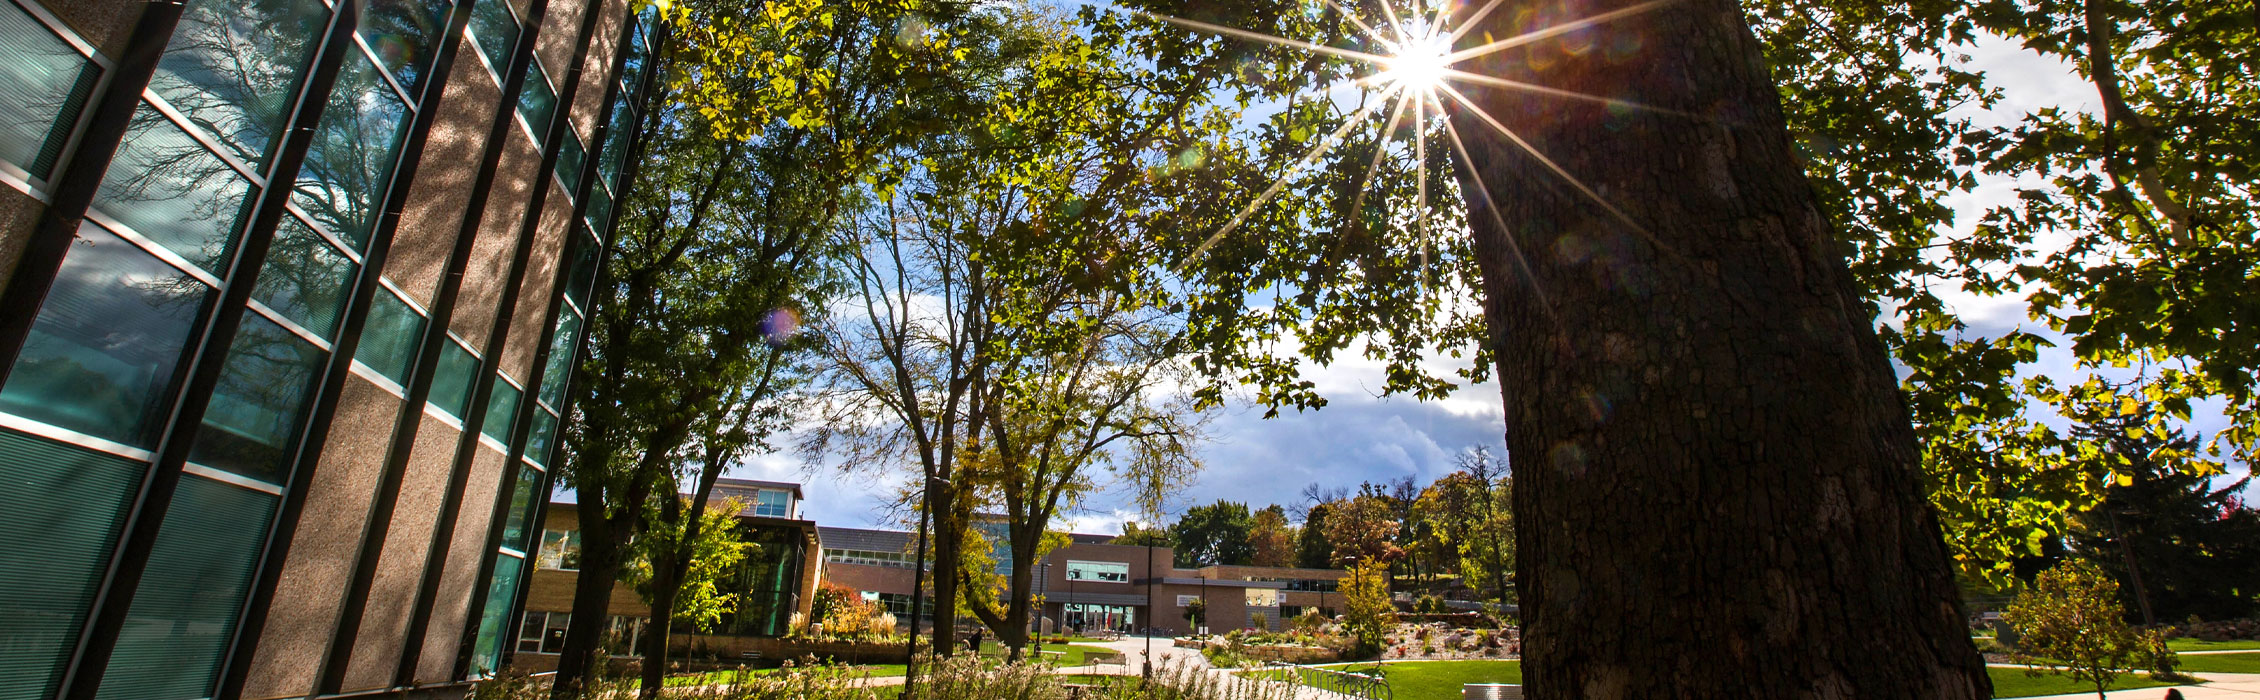 An autumn day on the UW-Whitewater campus